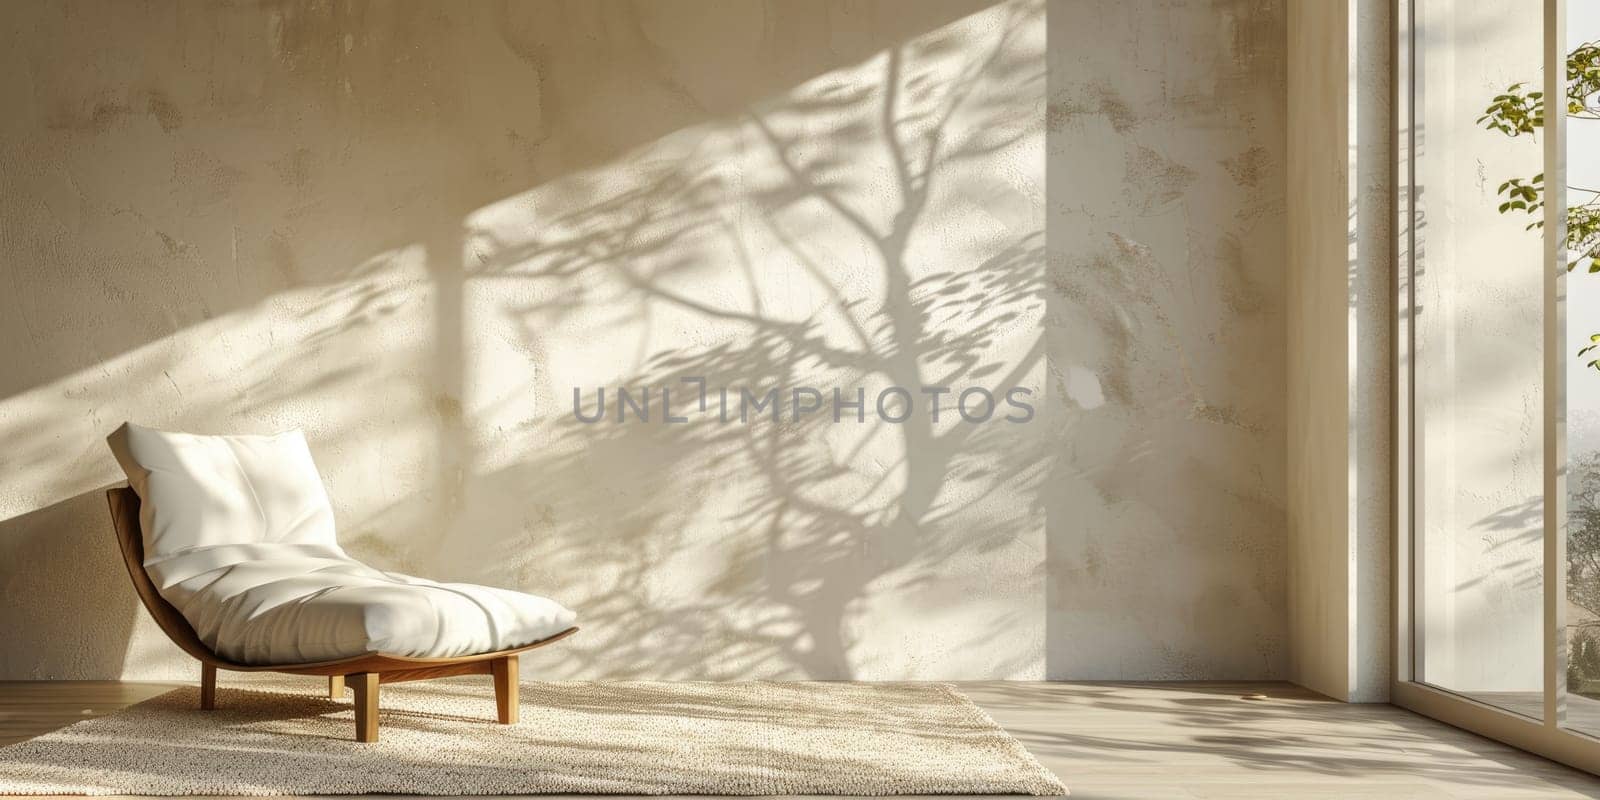 A white chair is in a room with a large window. The room is very clean and has a minimalist design